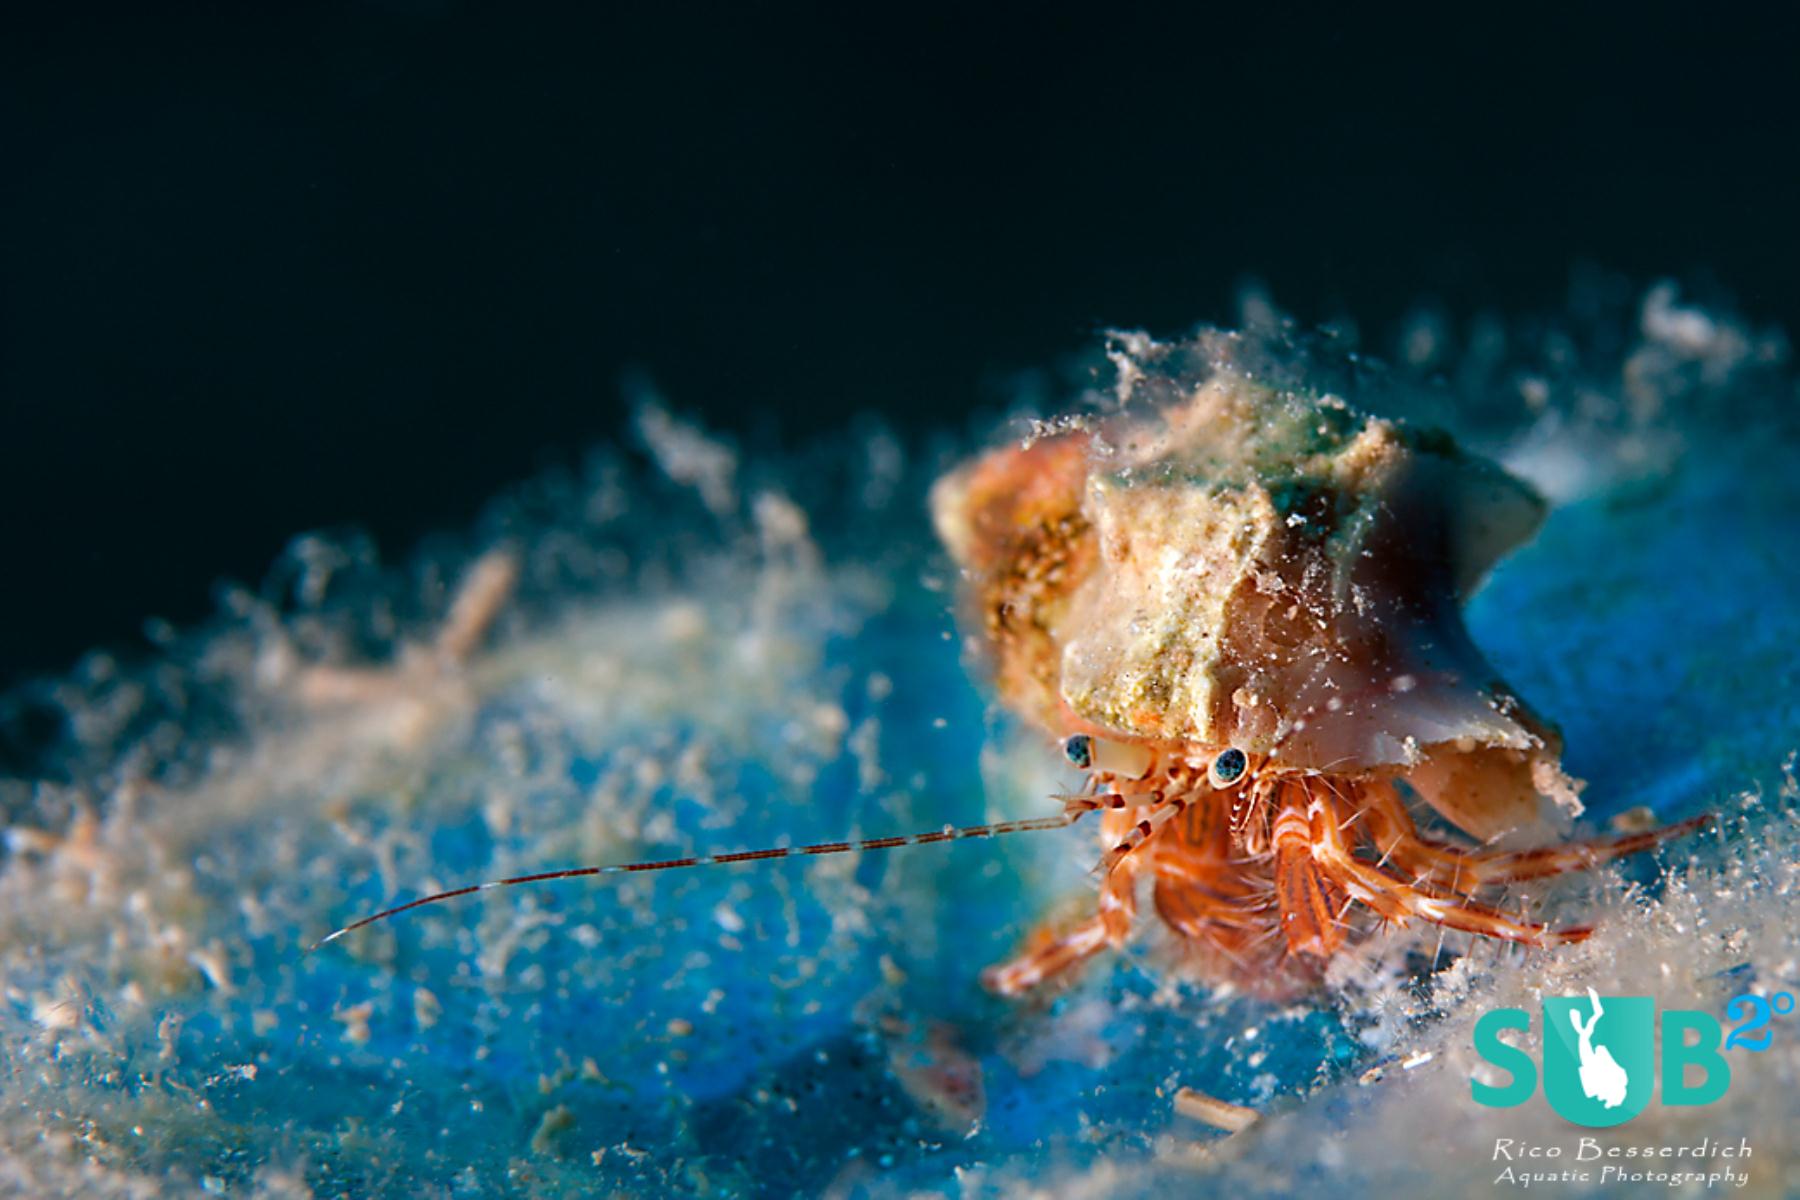 This tiny hermit crab is placed on the lower right intersection of the rule of thirds grid.